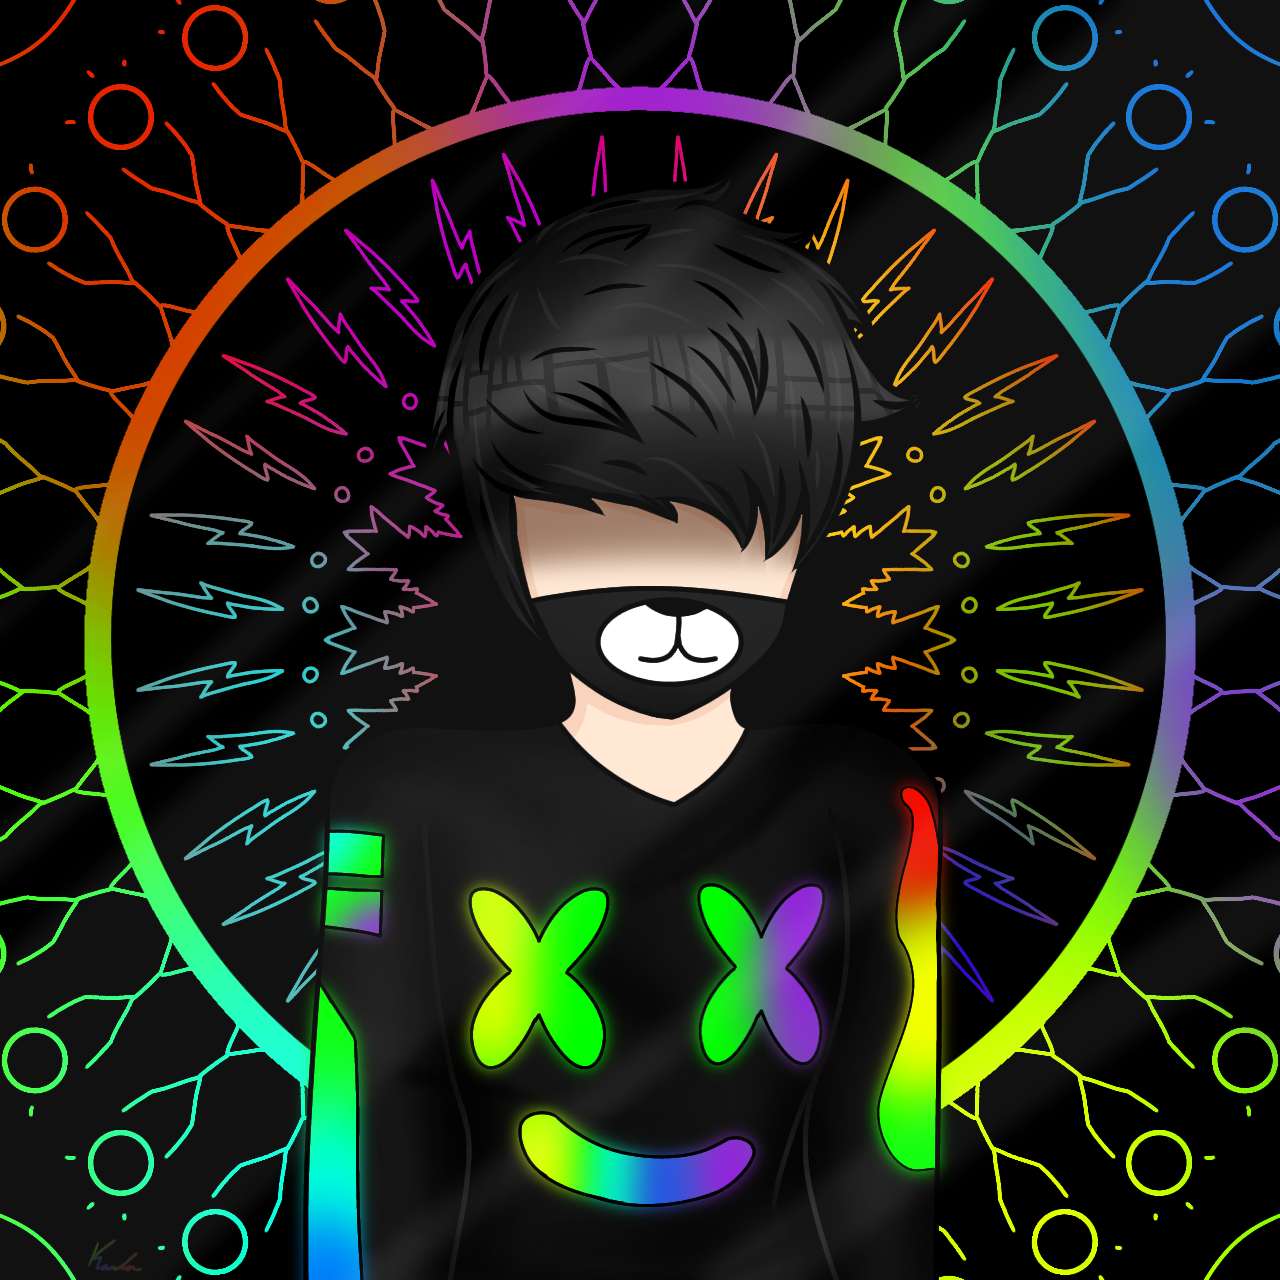 ClaX's Profile Picture on PvPRP